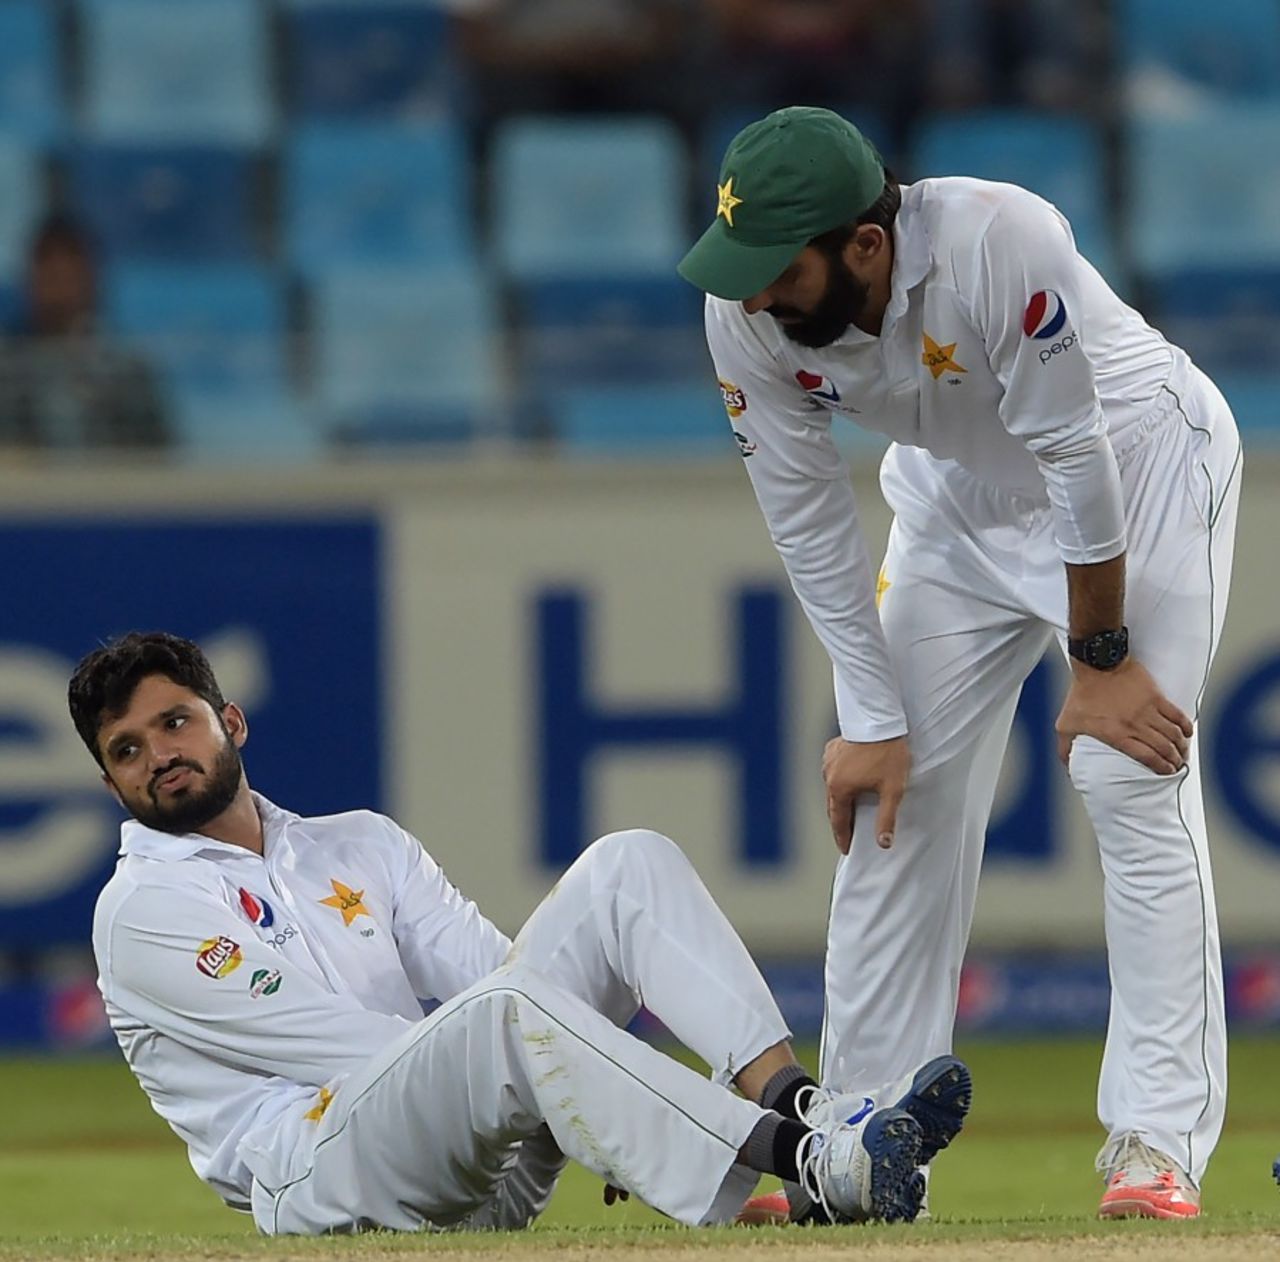 Azhar Ali injured his hand while attempting a catch, Pakistan v West Indies, 1st Test, Dubai, 3rd day, October 15, 2016